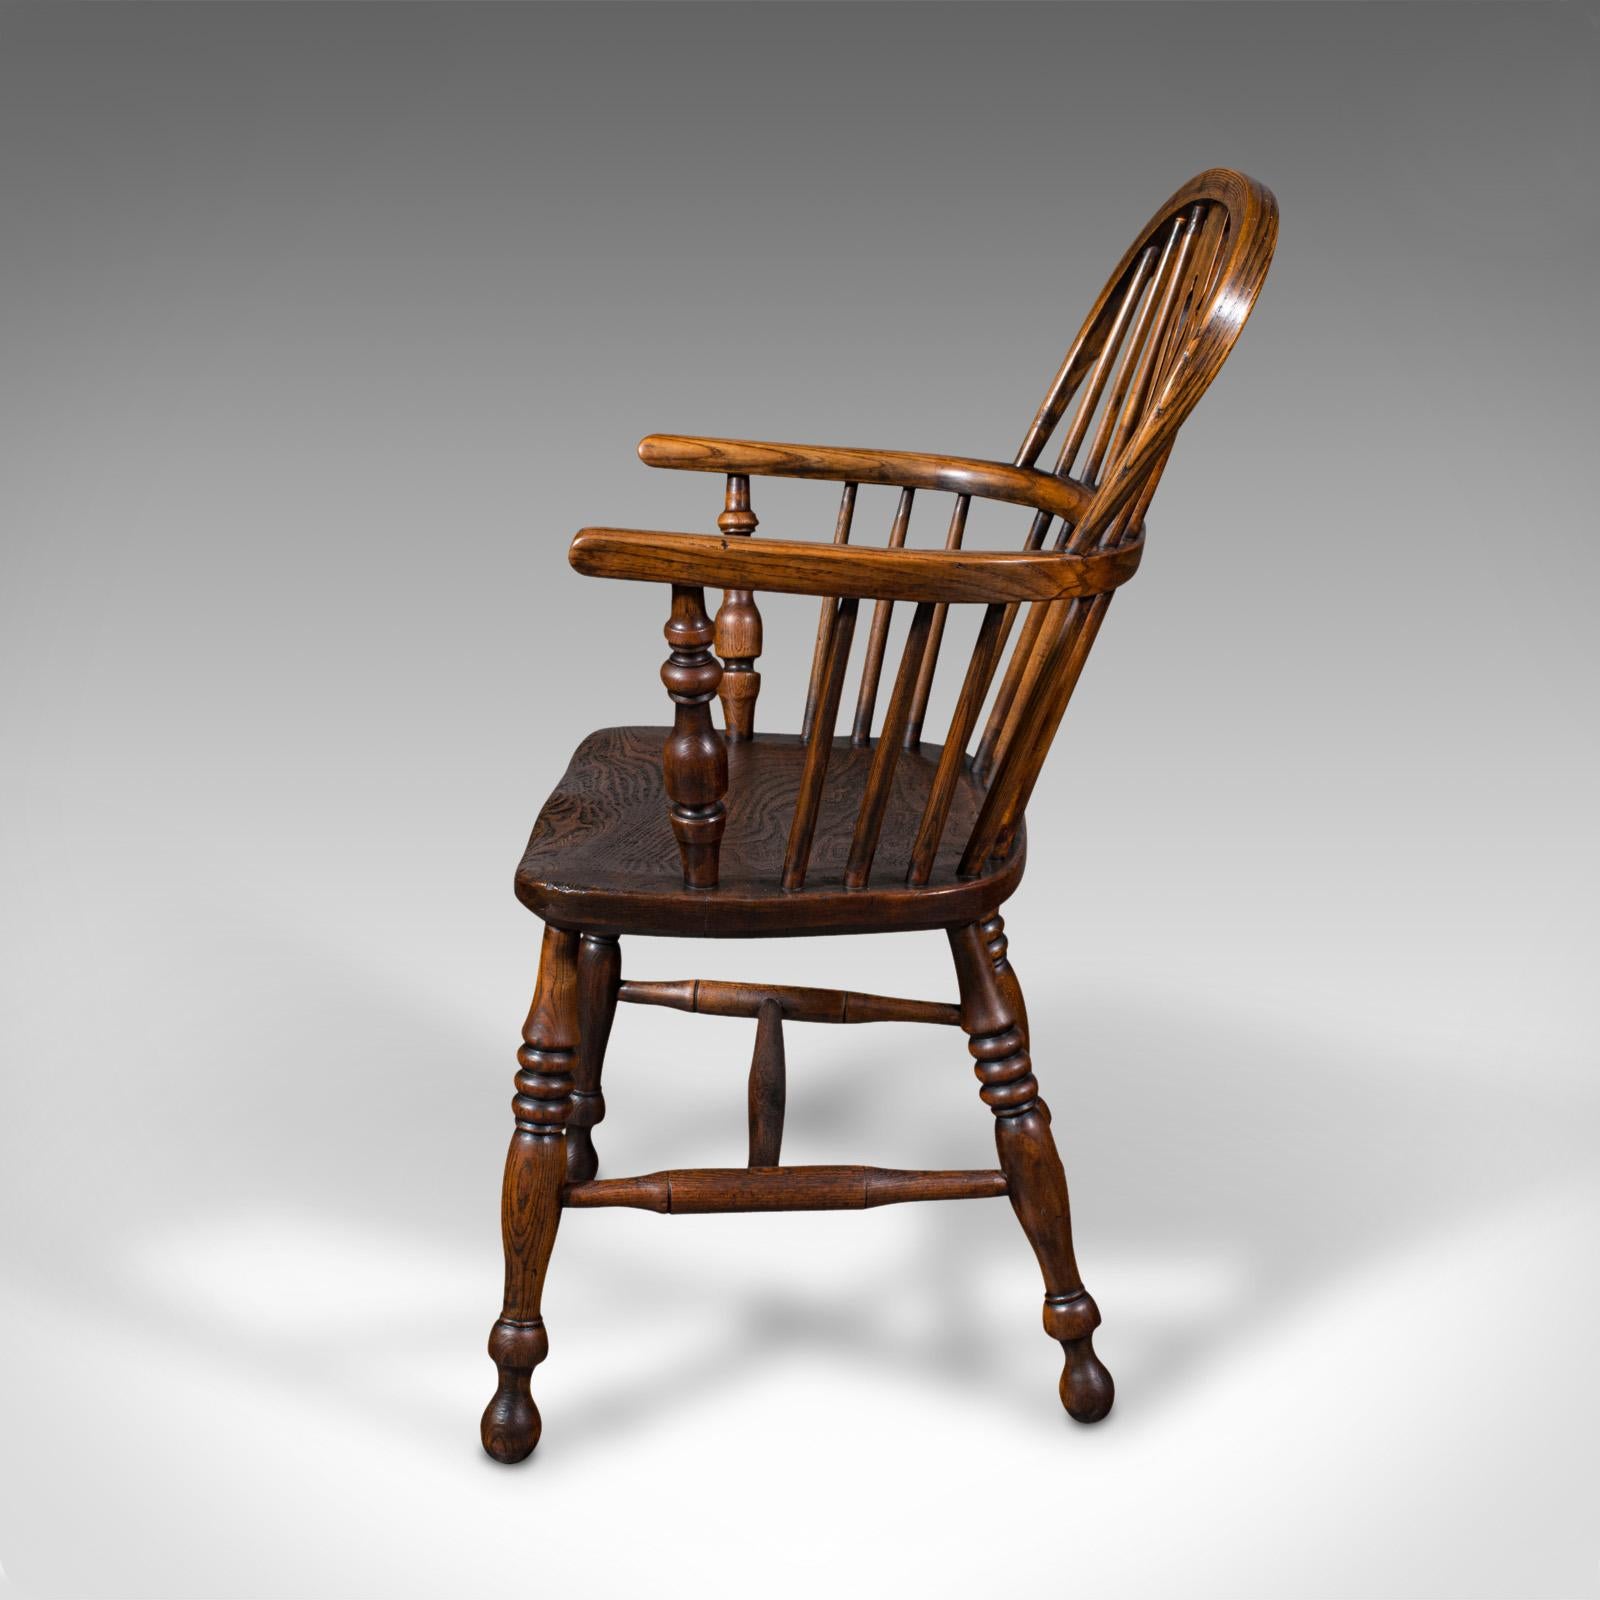 19th Century Pair of Antique Windsor Chairs, English, Elm, Ash, Elbow, Armchair, Victorian